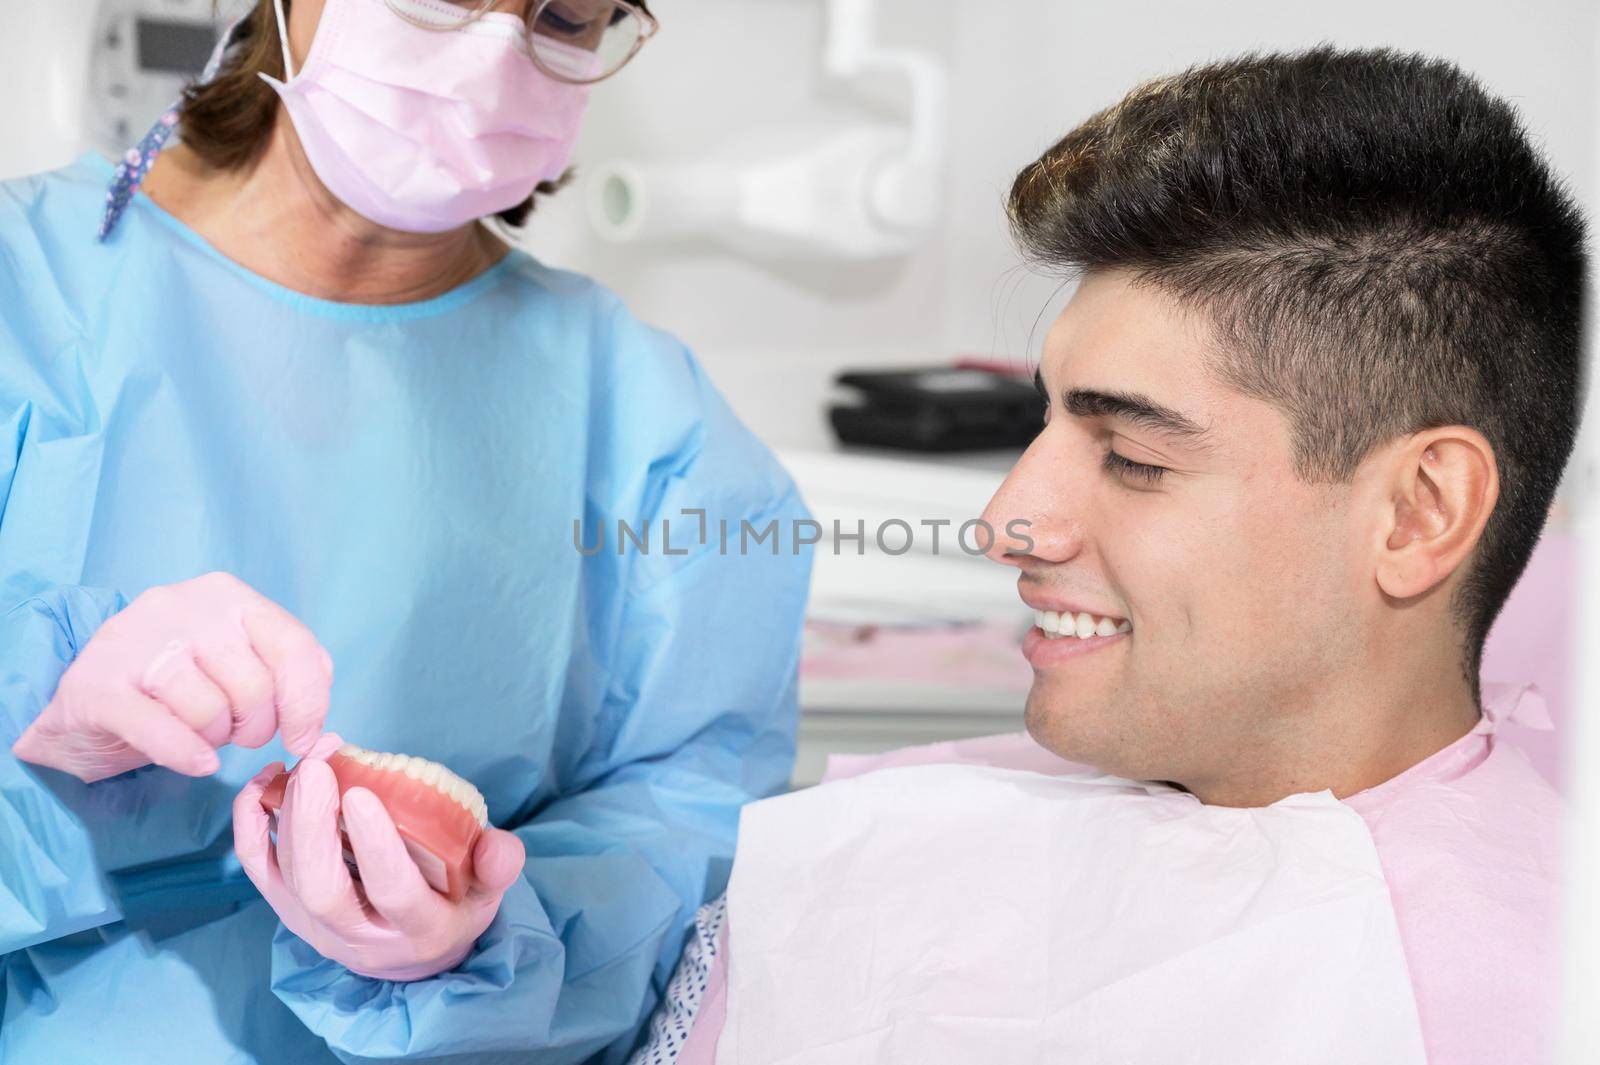 Orthodontist holding invisible retainer for teeth alignment. In clinic shows patient modern dental technology - removable transparent plastic aligners or invisalign use and benefit. by HERRAEZ